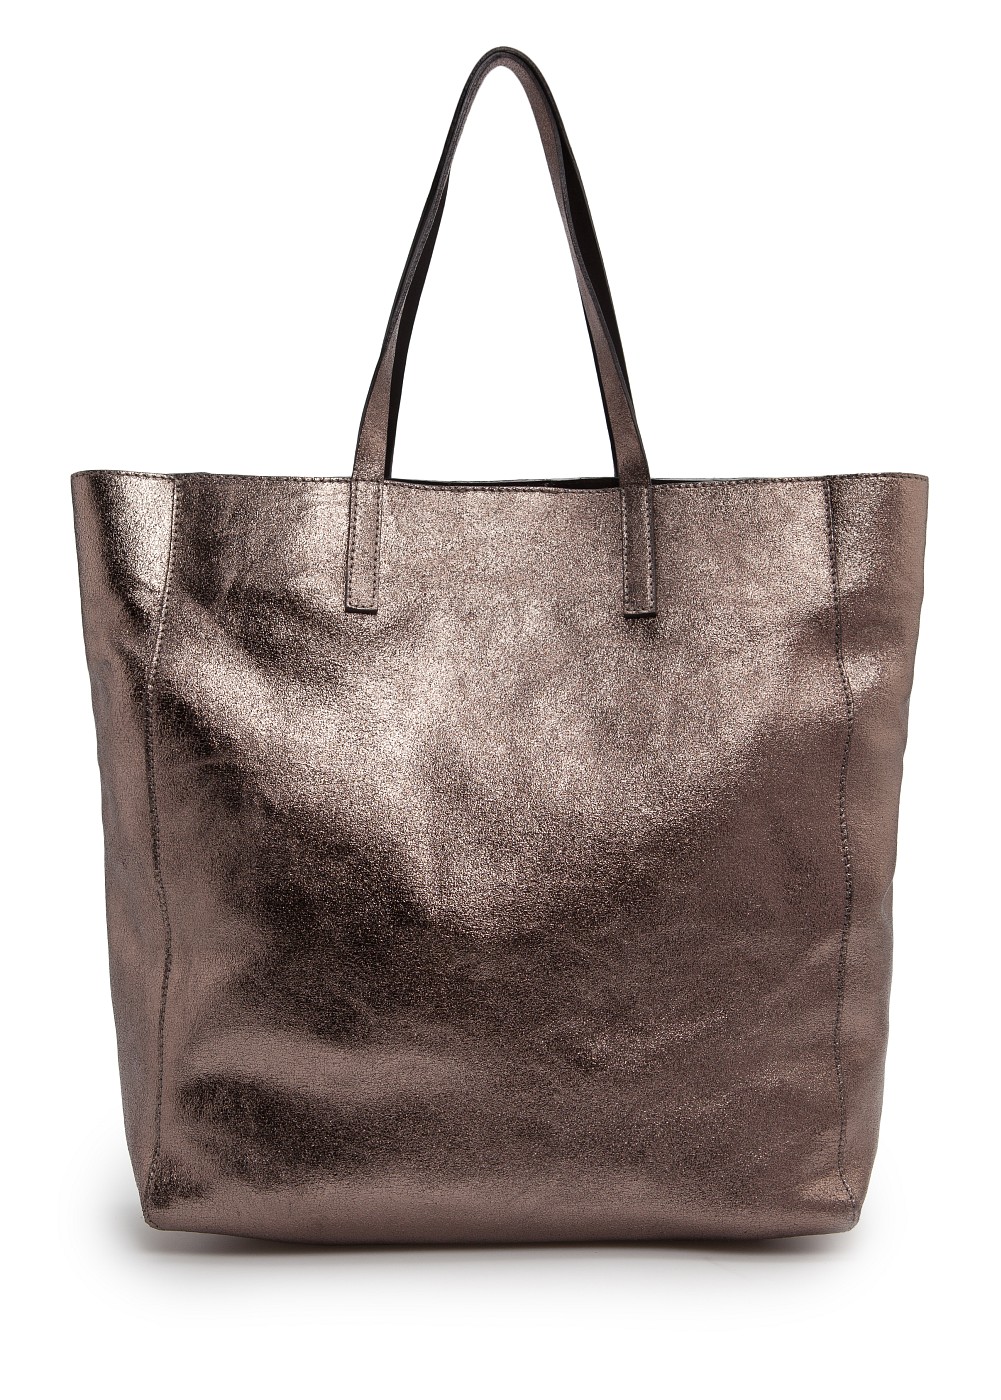 Lyst - Mango Touch Metallic Leather Tote in Brown